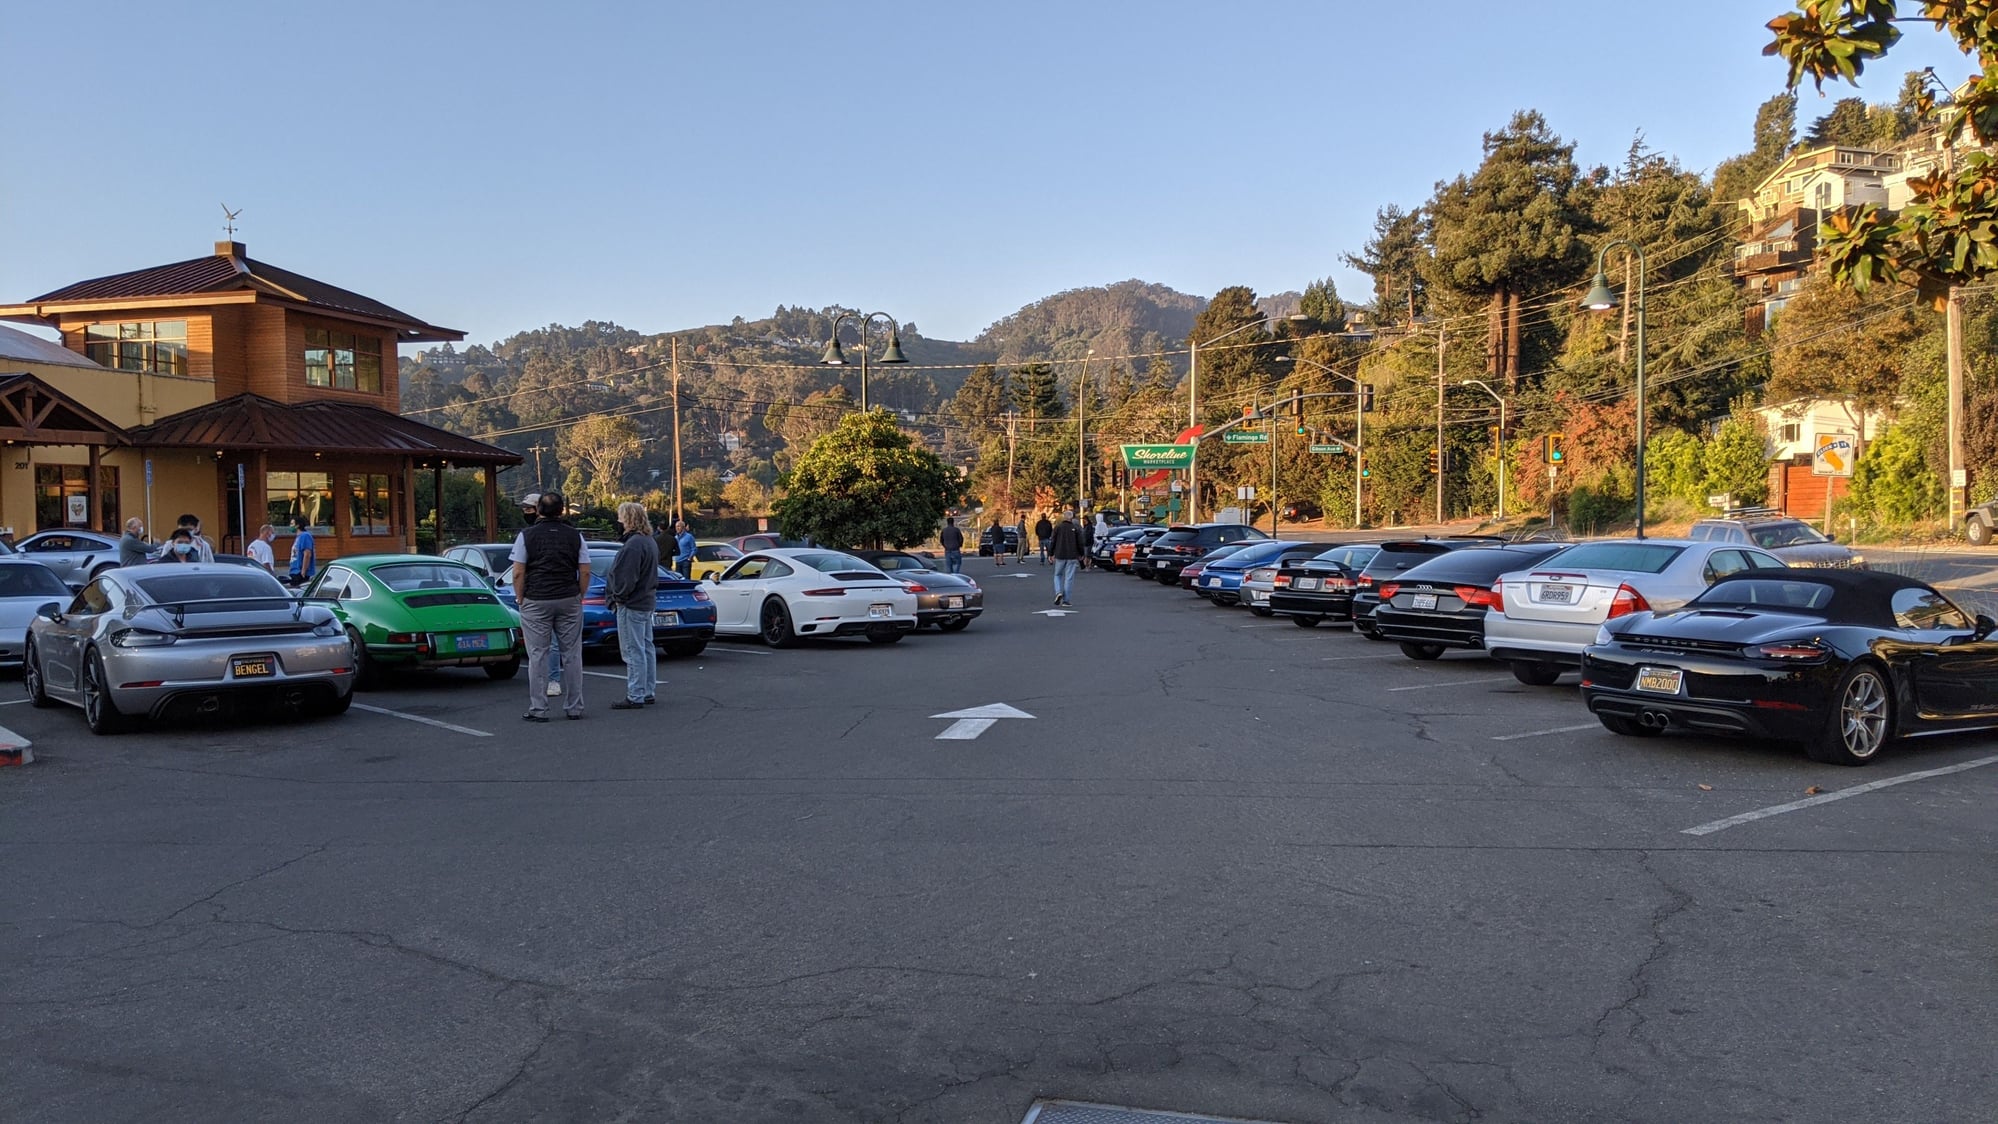 Group Drive Nov 1st - Marin/Sonoma County Highway 1 - Mill Valley to ...